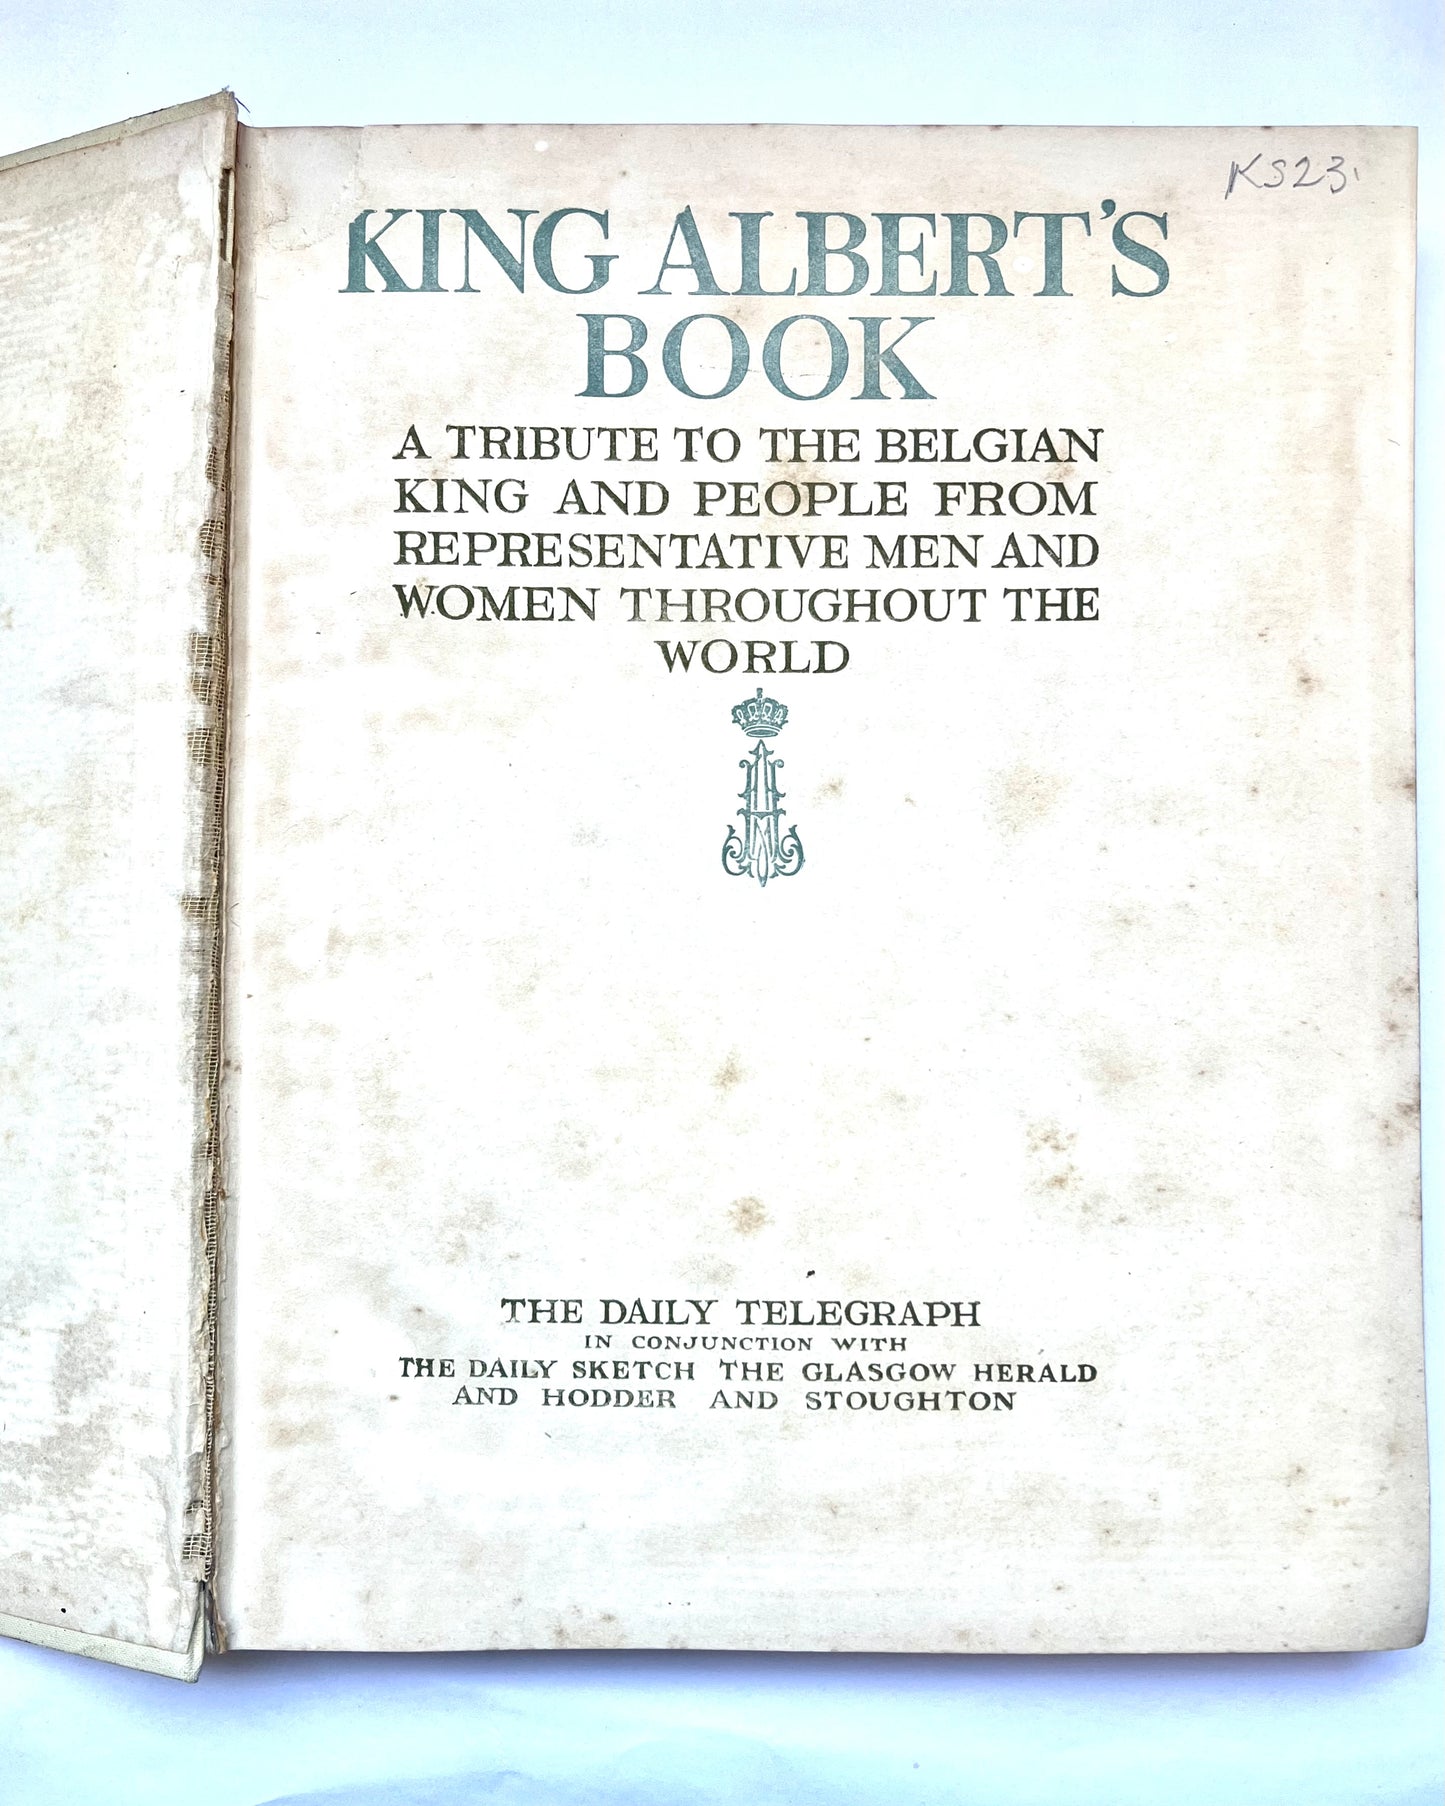 King Albert's Book: A Tribute to the Belgian King and People from Representative Men and Women Throughout the World. 1914 Telegraph edition.